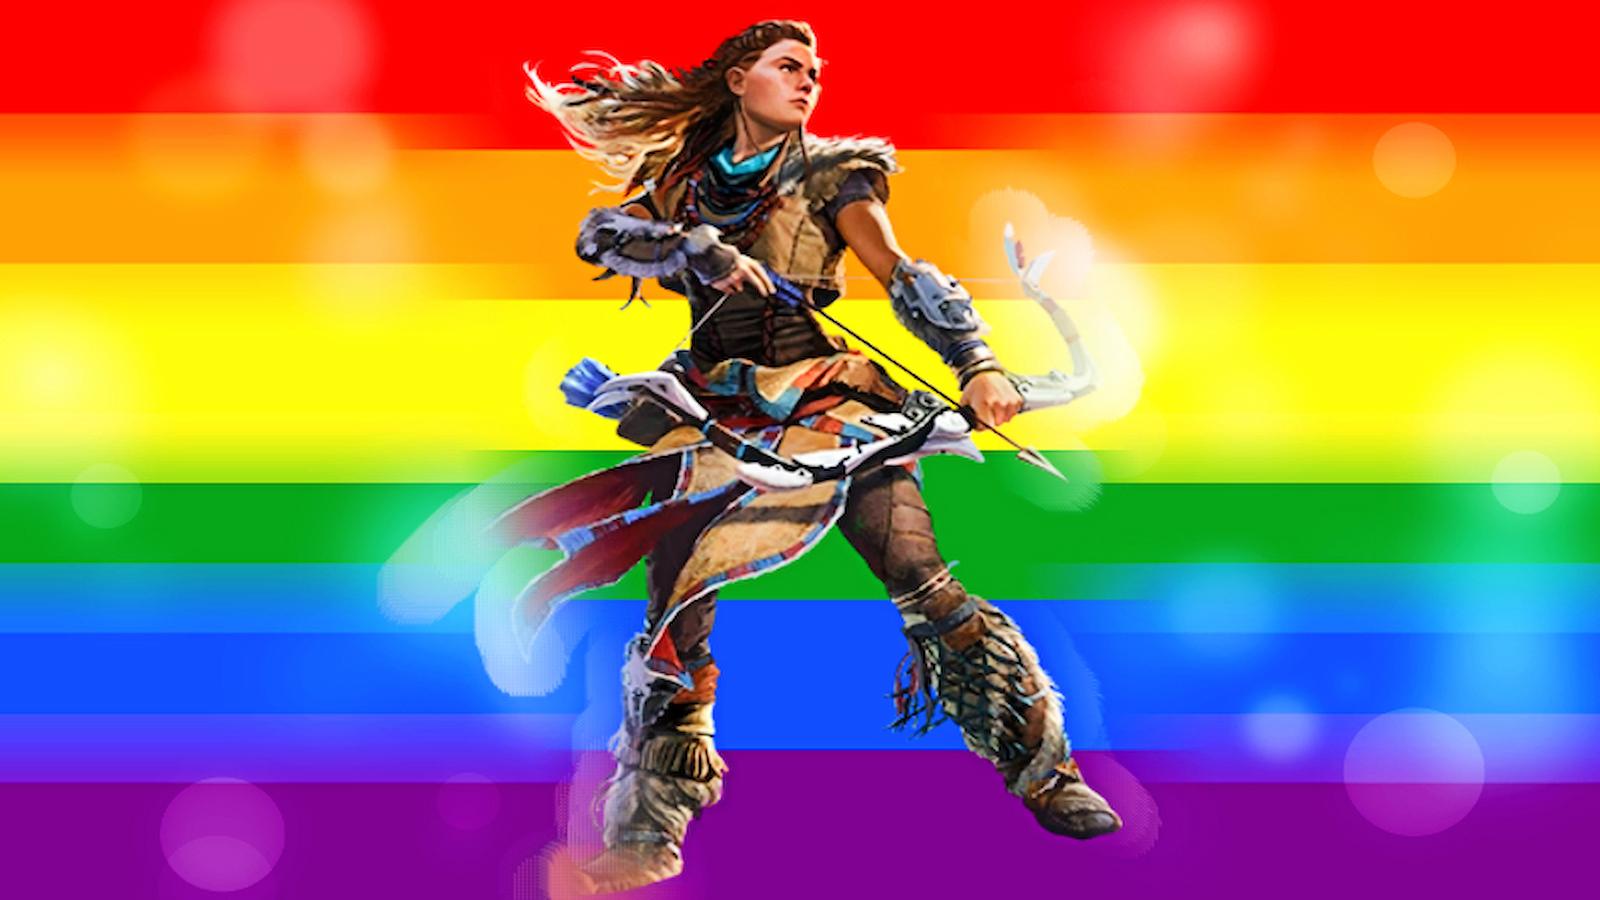 Aloy standing in front of the pride flag